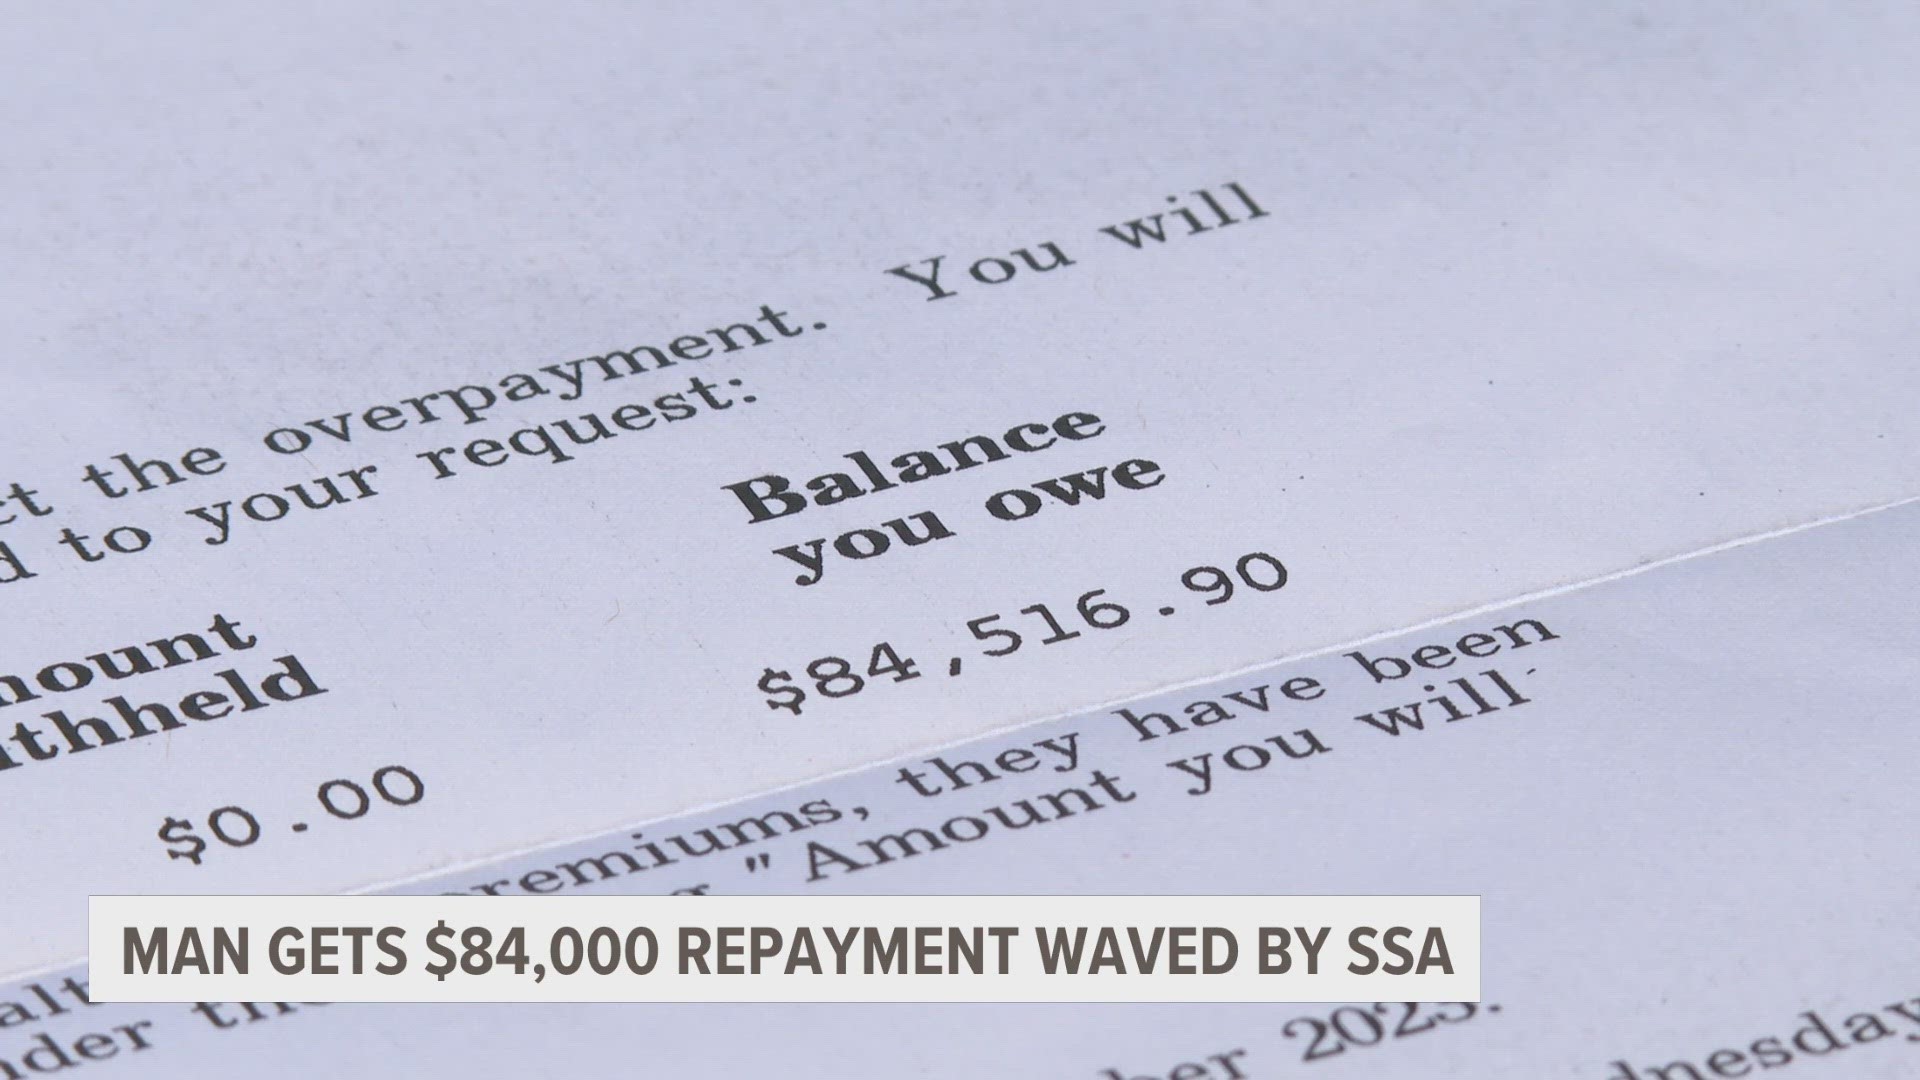 Less than a month after being told his social security was being cut off and he would have to repay $84,000, that repayment has now been waived.